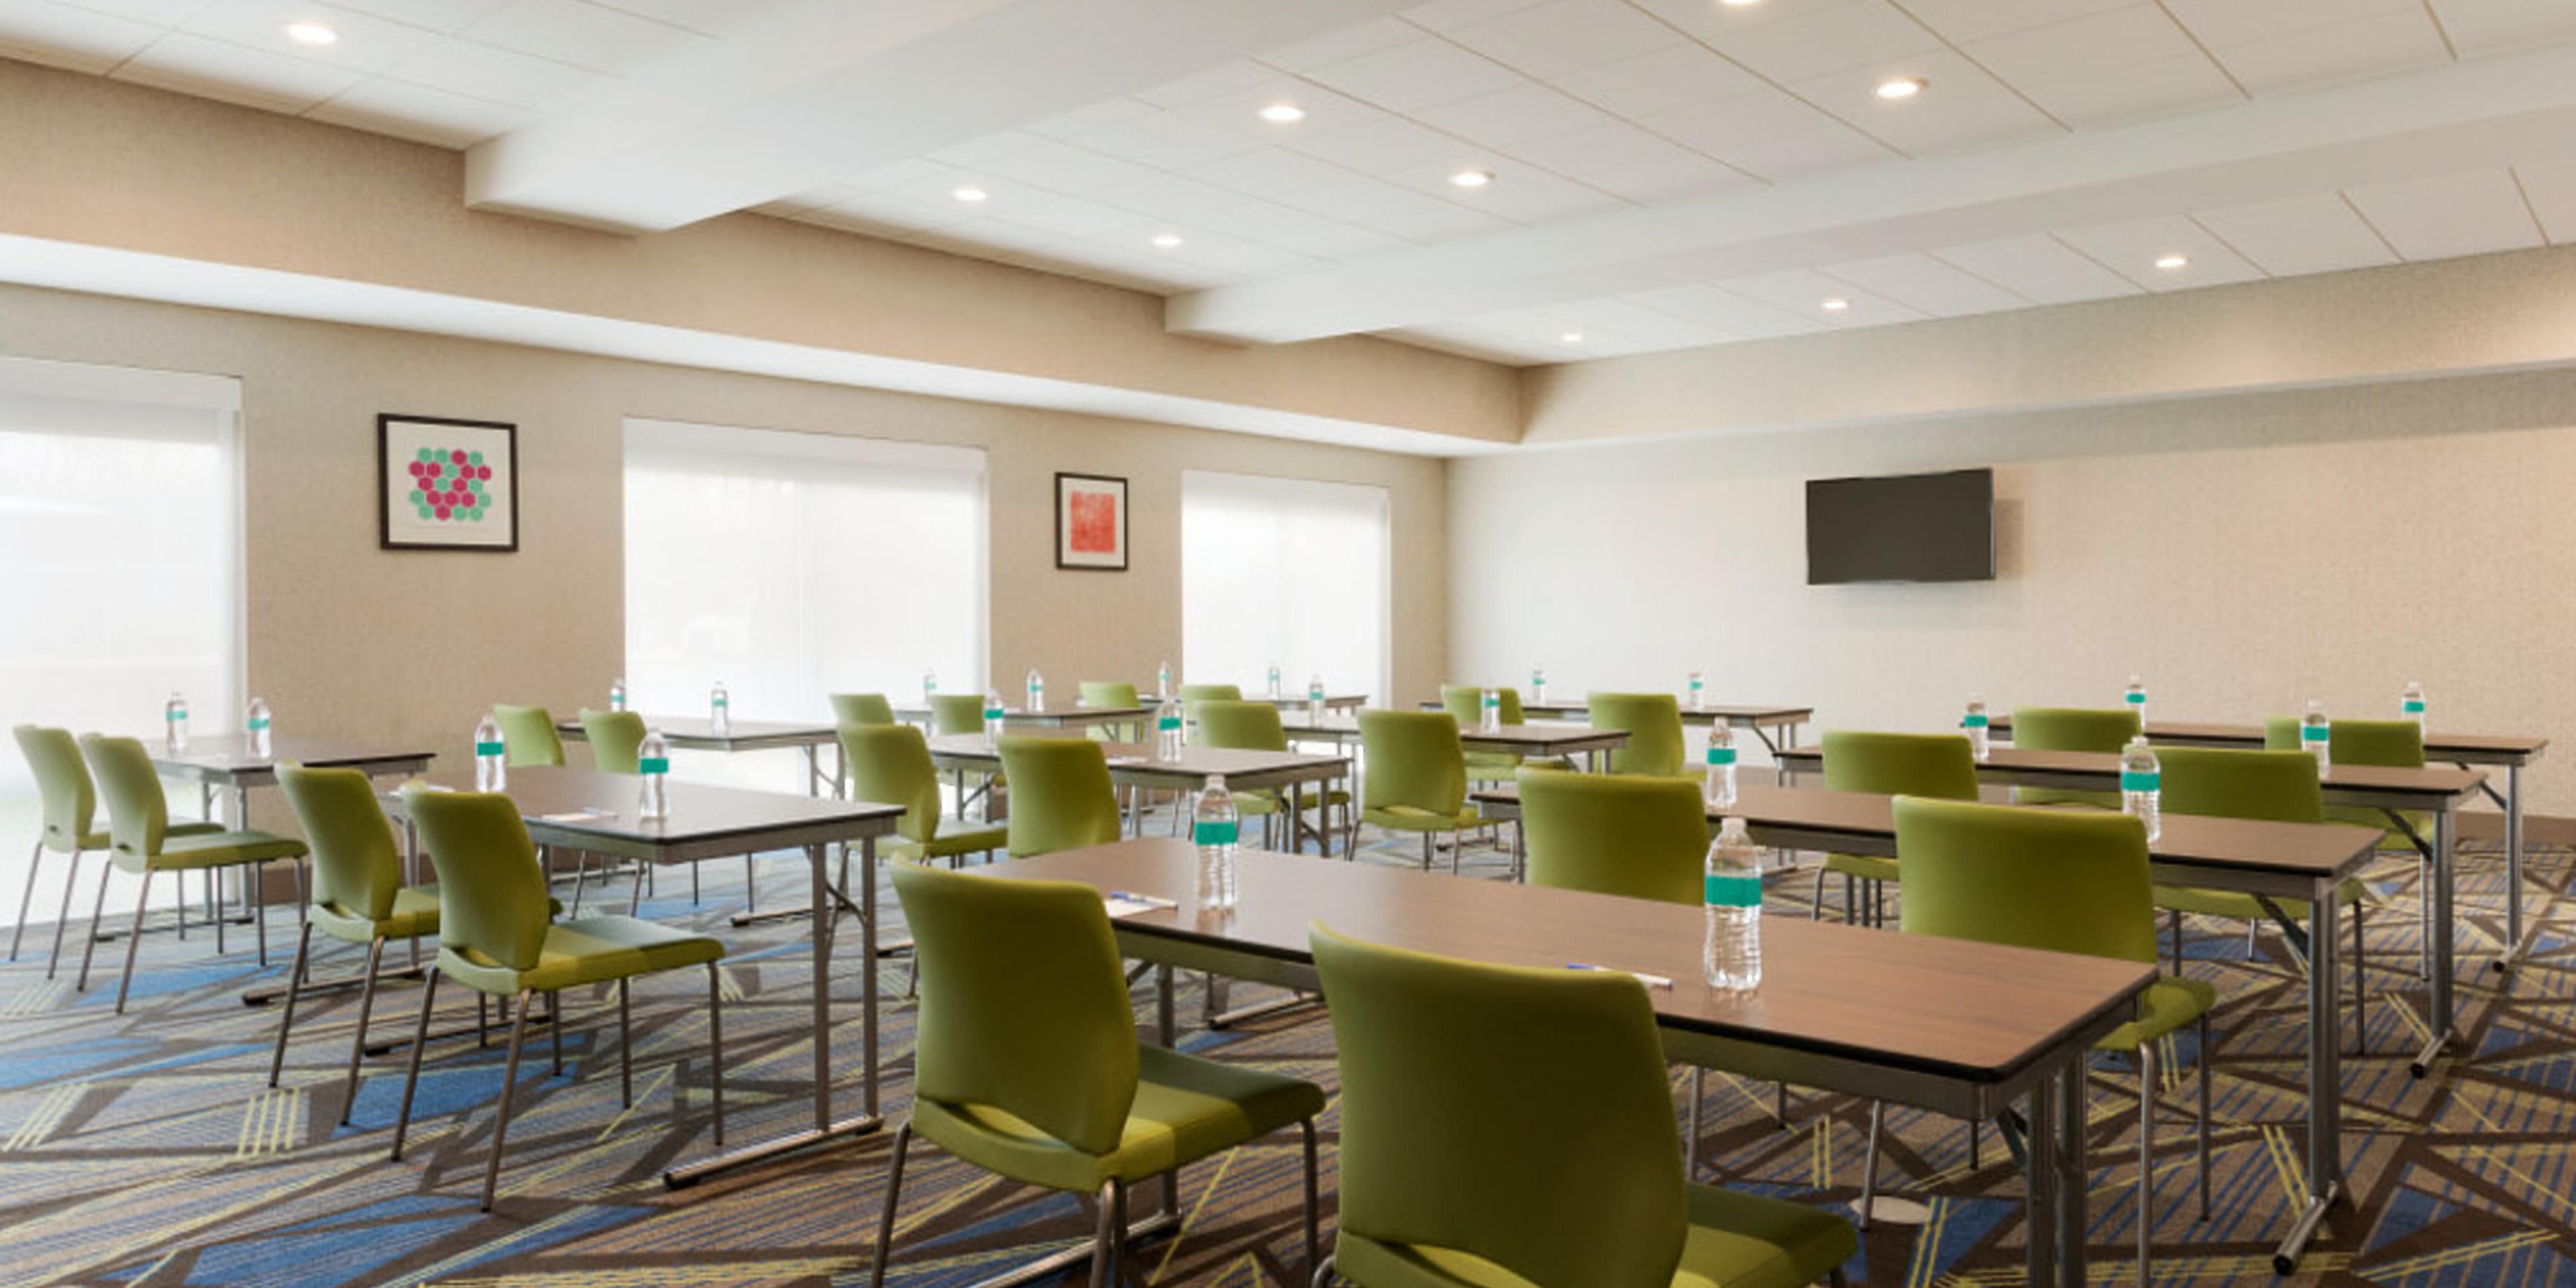 We offer a large, 1,100 sq ft, meeting space. We provide complimentary Wi-Fi, coffee, and also allow outside catering at no cost. We can assure you we are taking safety and sanitation precautions as well to ensure the safety of you and your guest. Contact sales today to book your next group, event, or meeting. 